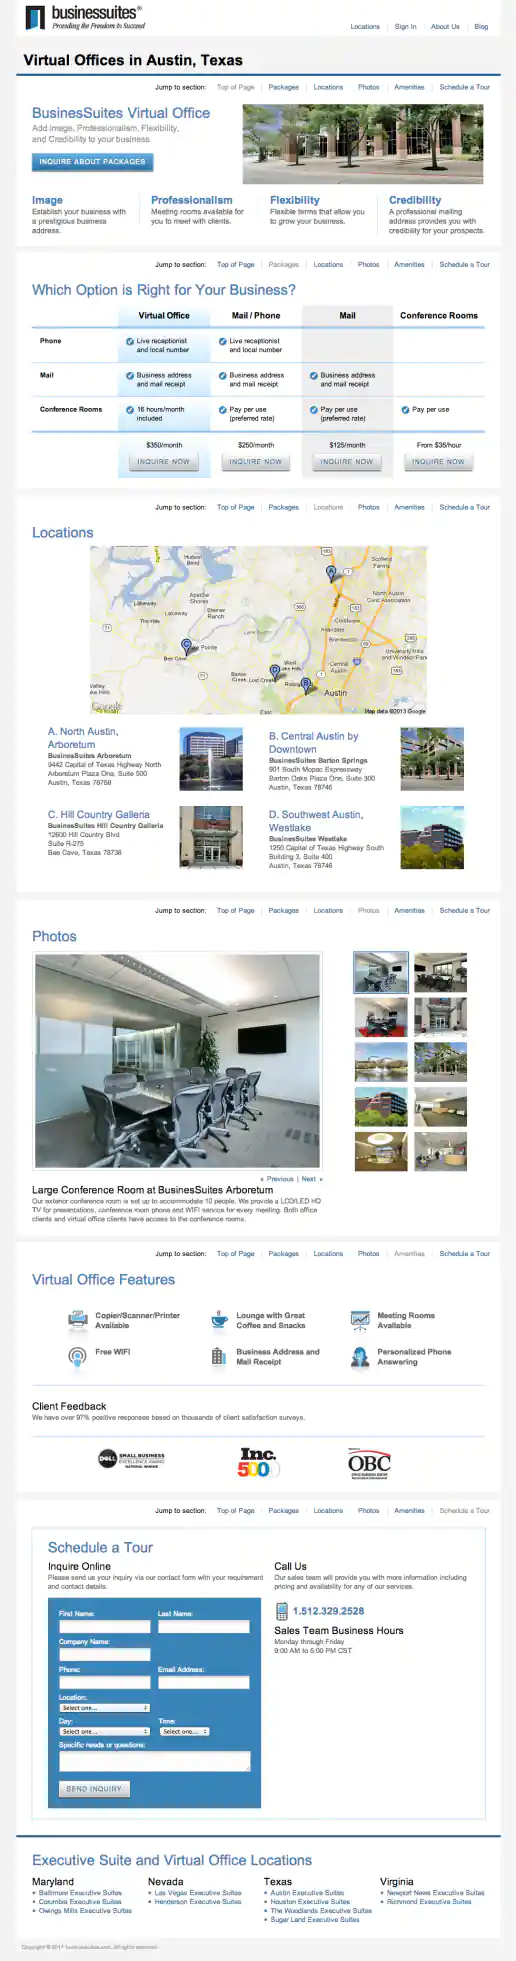 Virtual Offices Page - version 2